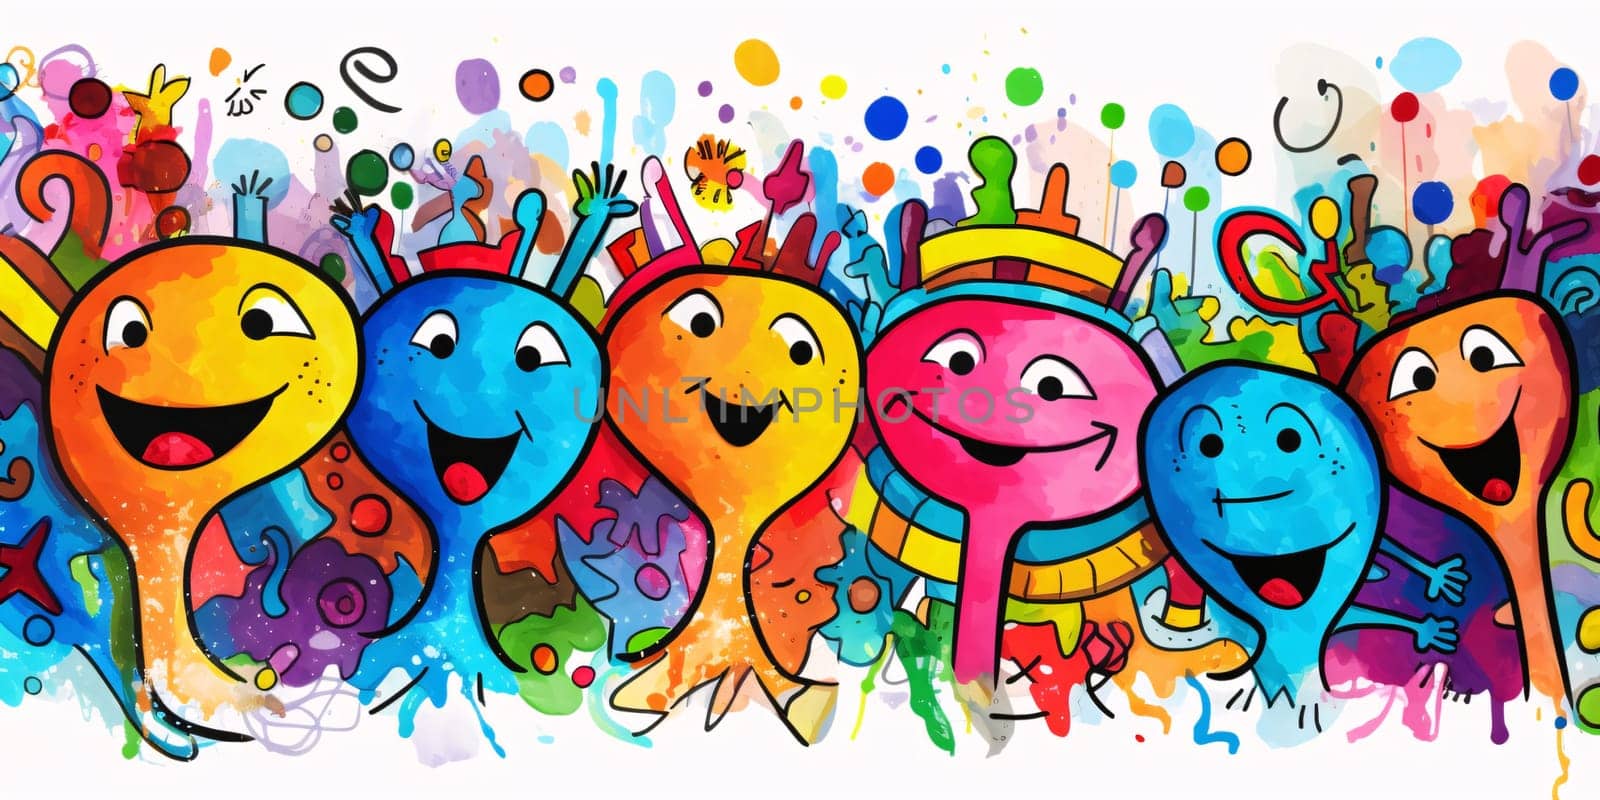 Cute colorful hand drawn doodle cartoon characters, vector illustration by ThemesS